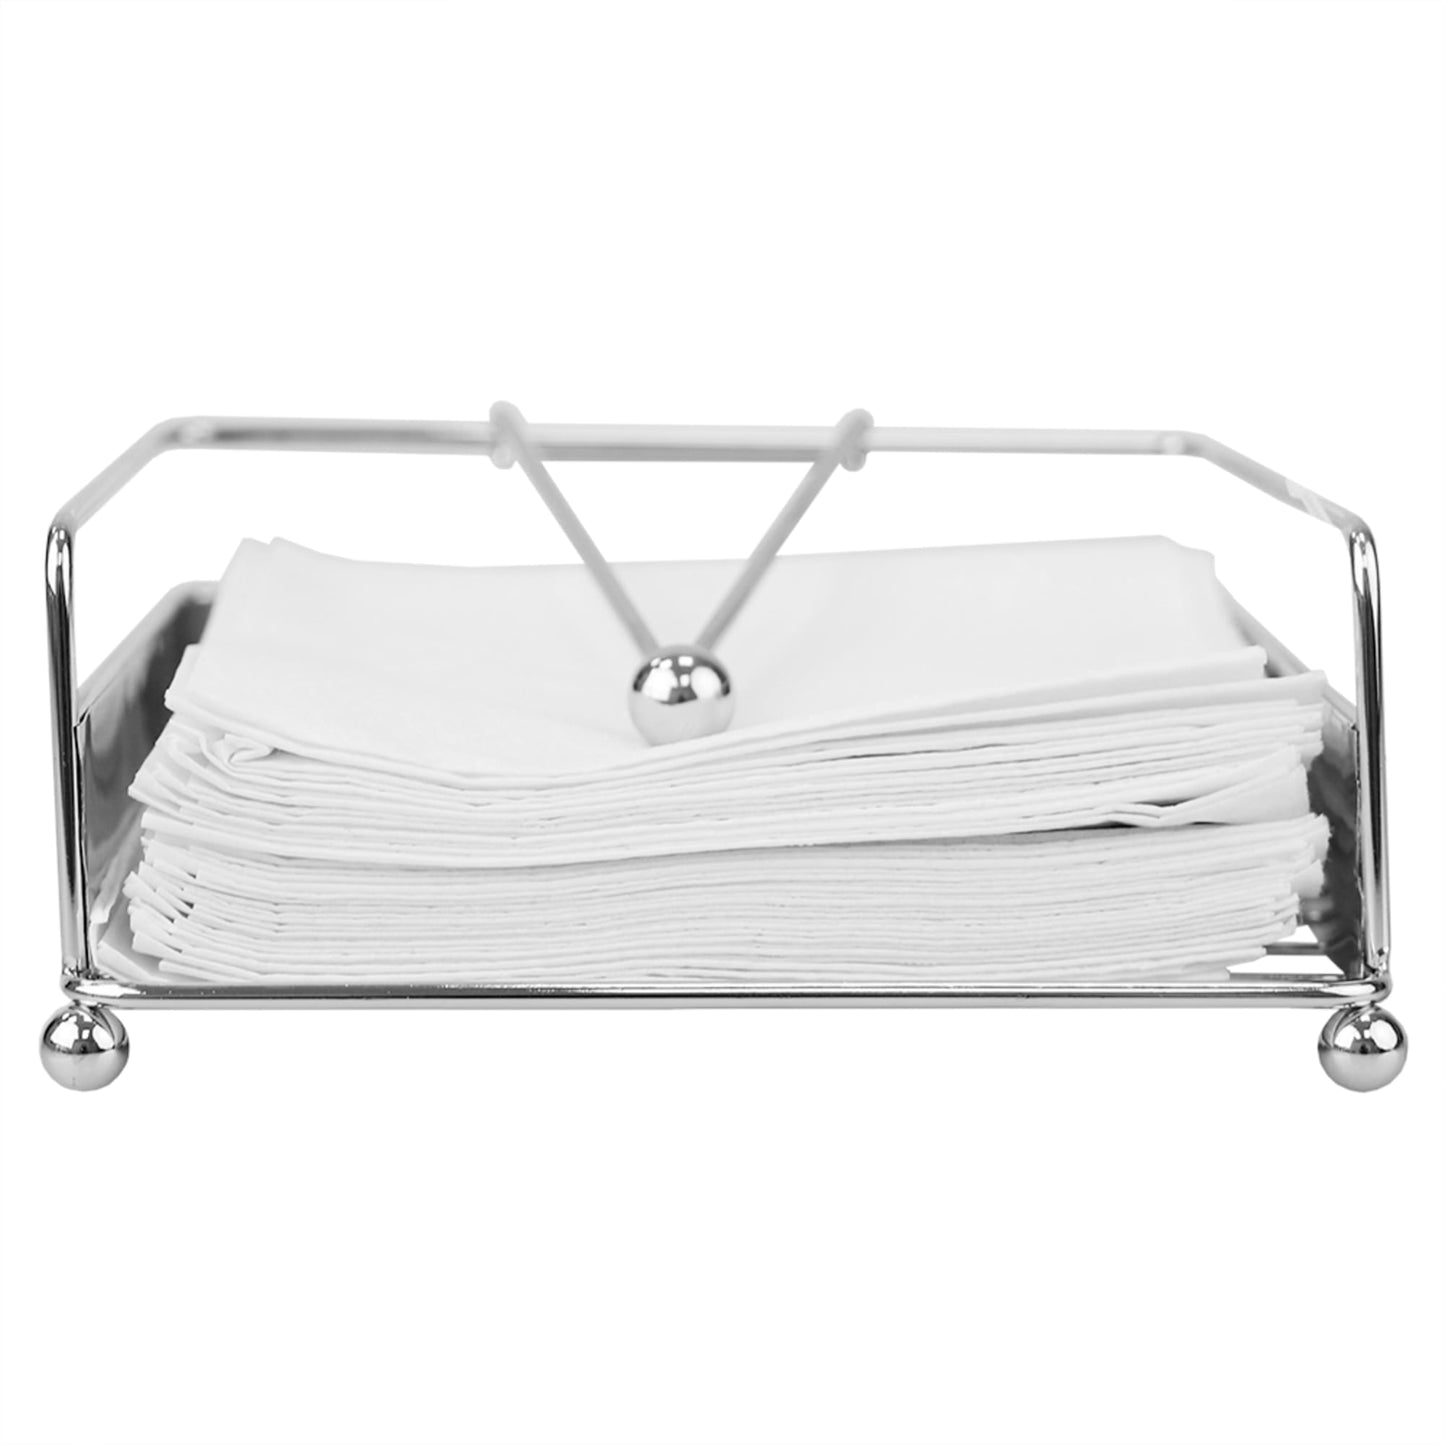 Pave Flat Steel Napkin Holder with Weighted Pivoting Arm, Chrome